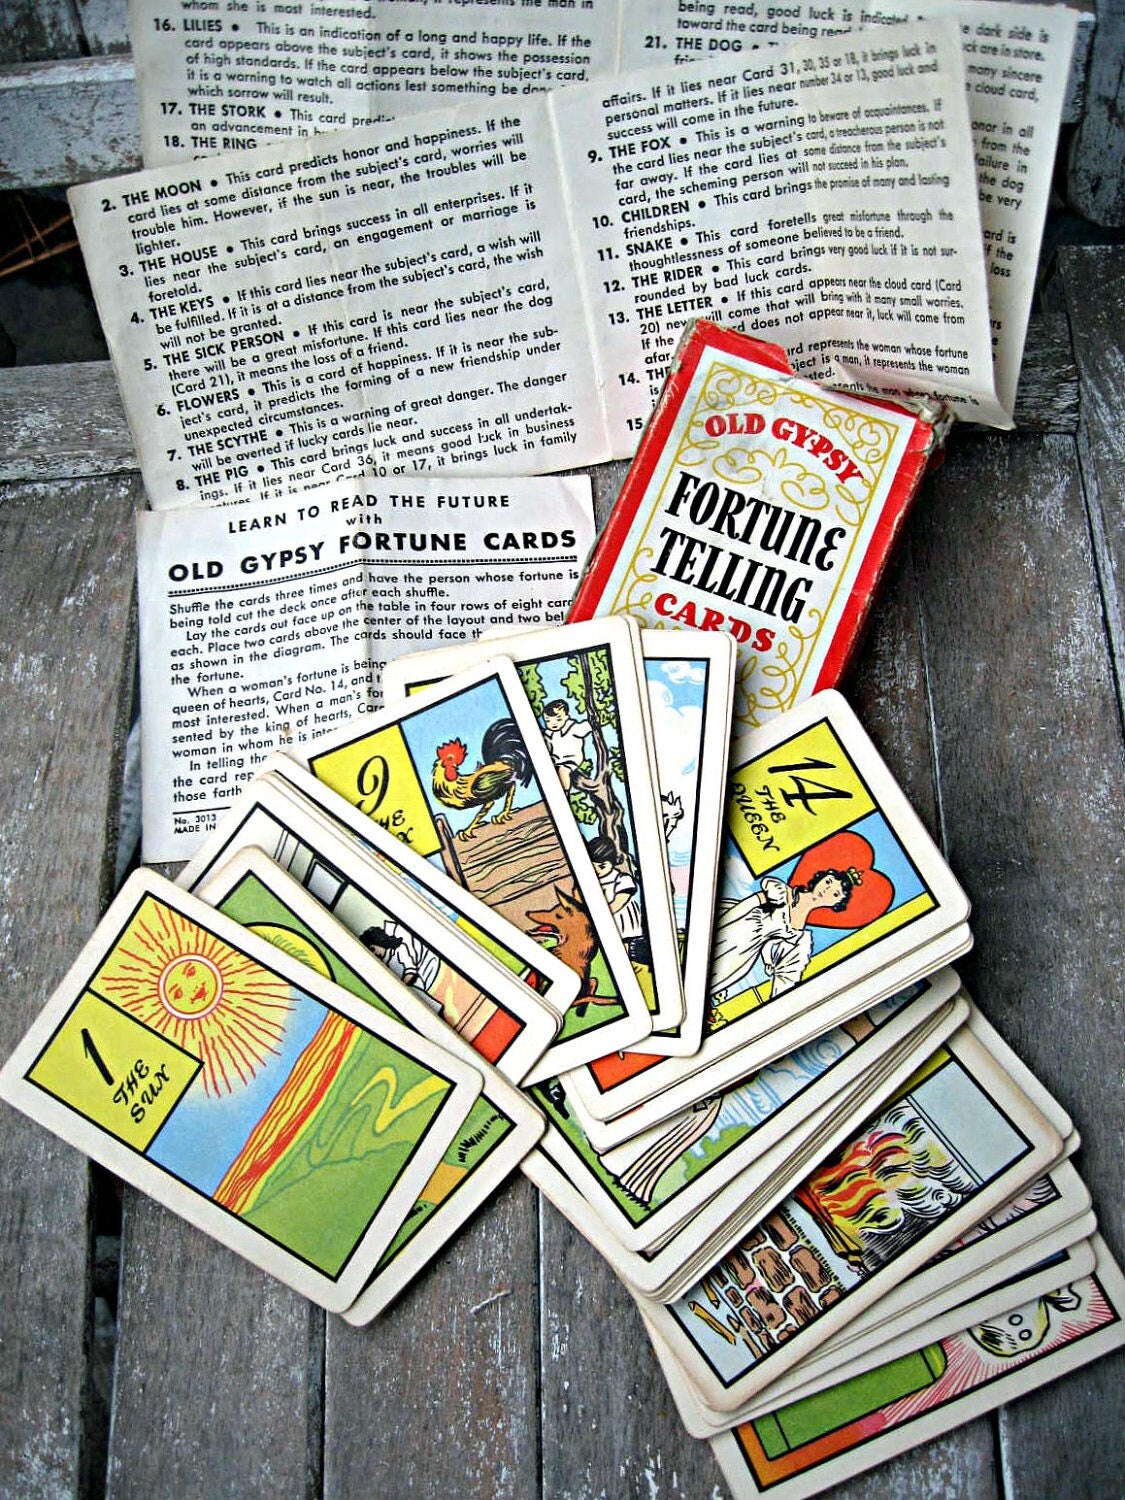 Vintage Fortune Telling cards by Whitman 1940 Old Gypsy